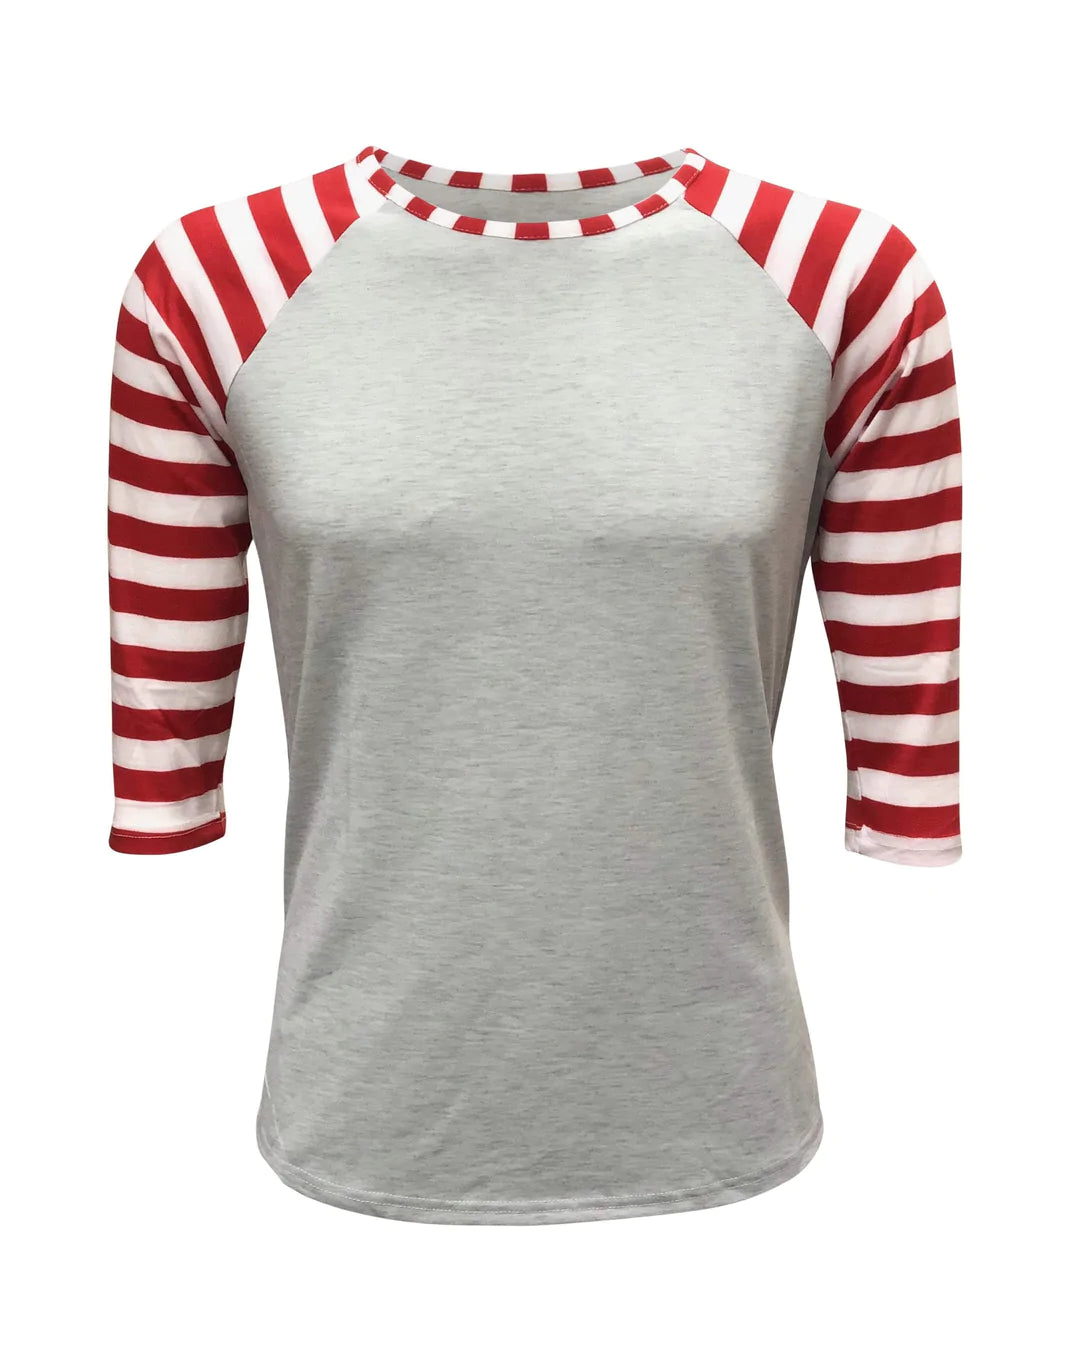 Christmas Adult Sublimation Grey Body Raglan with Candy Cane Striped Sleeves